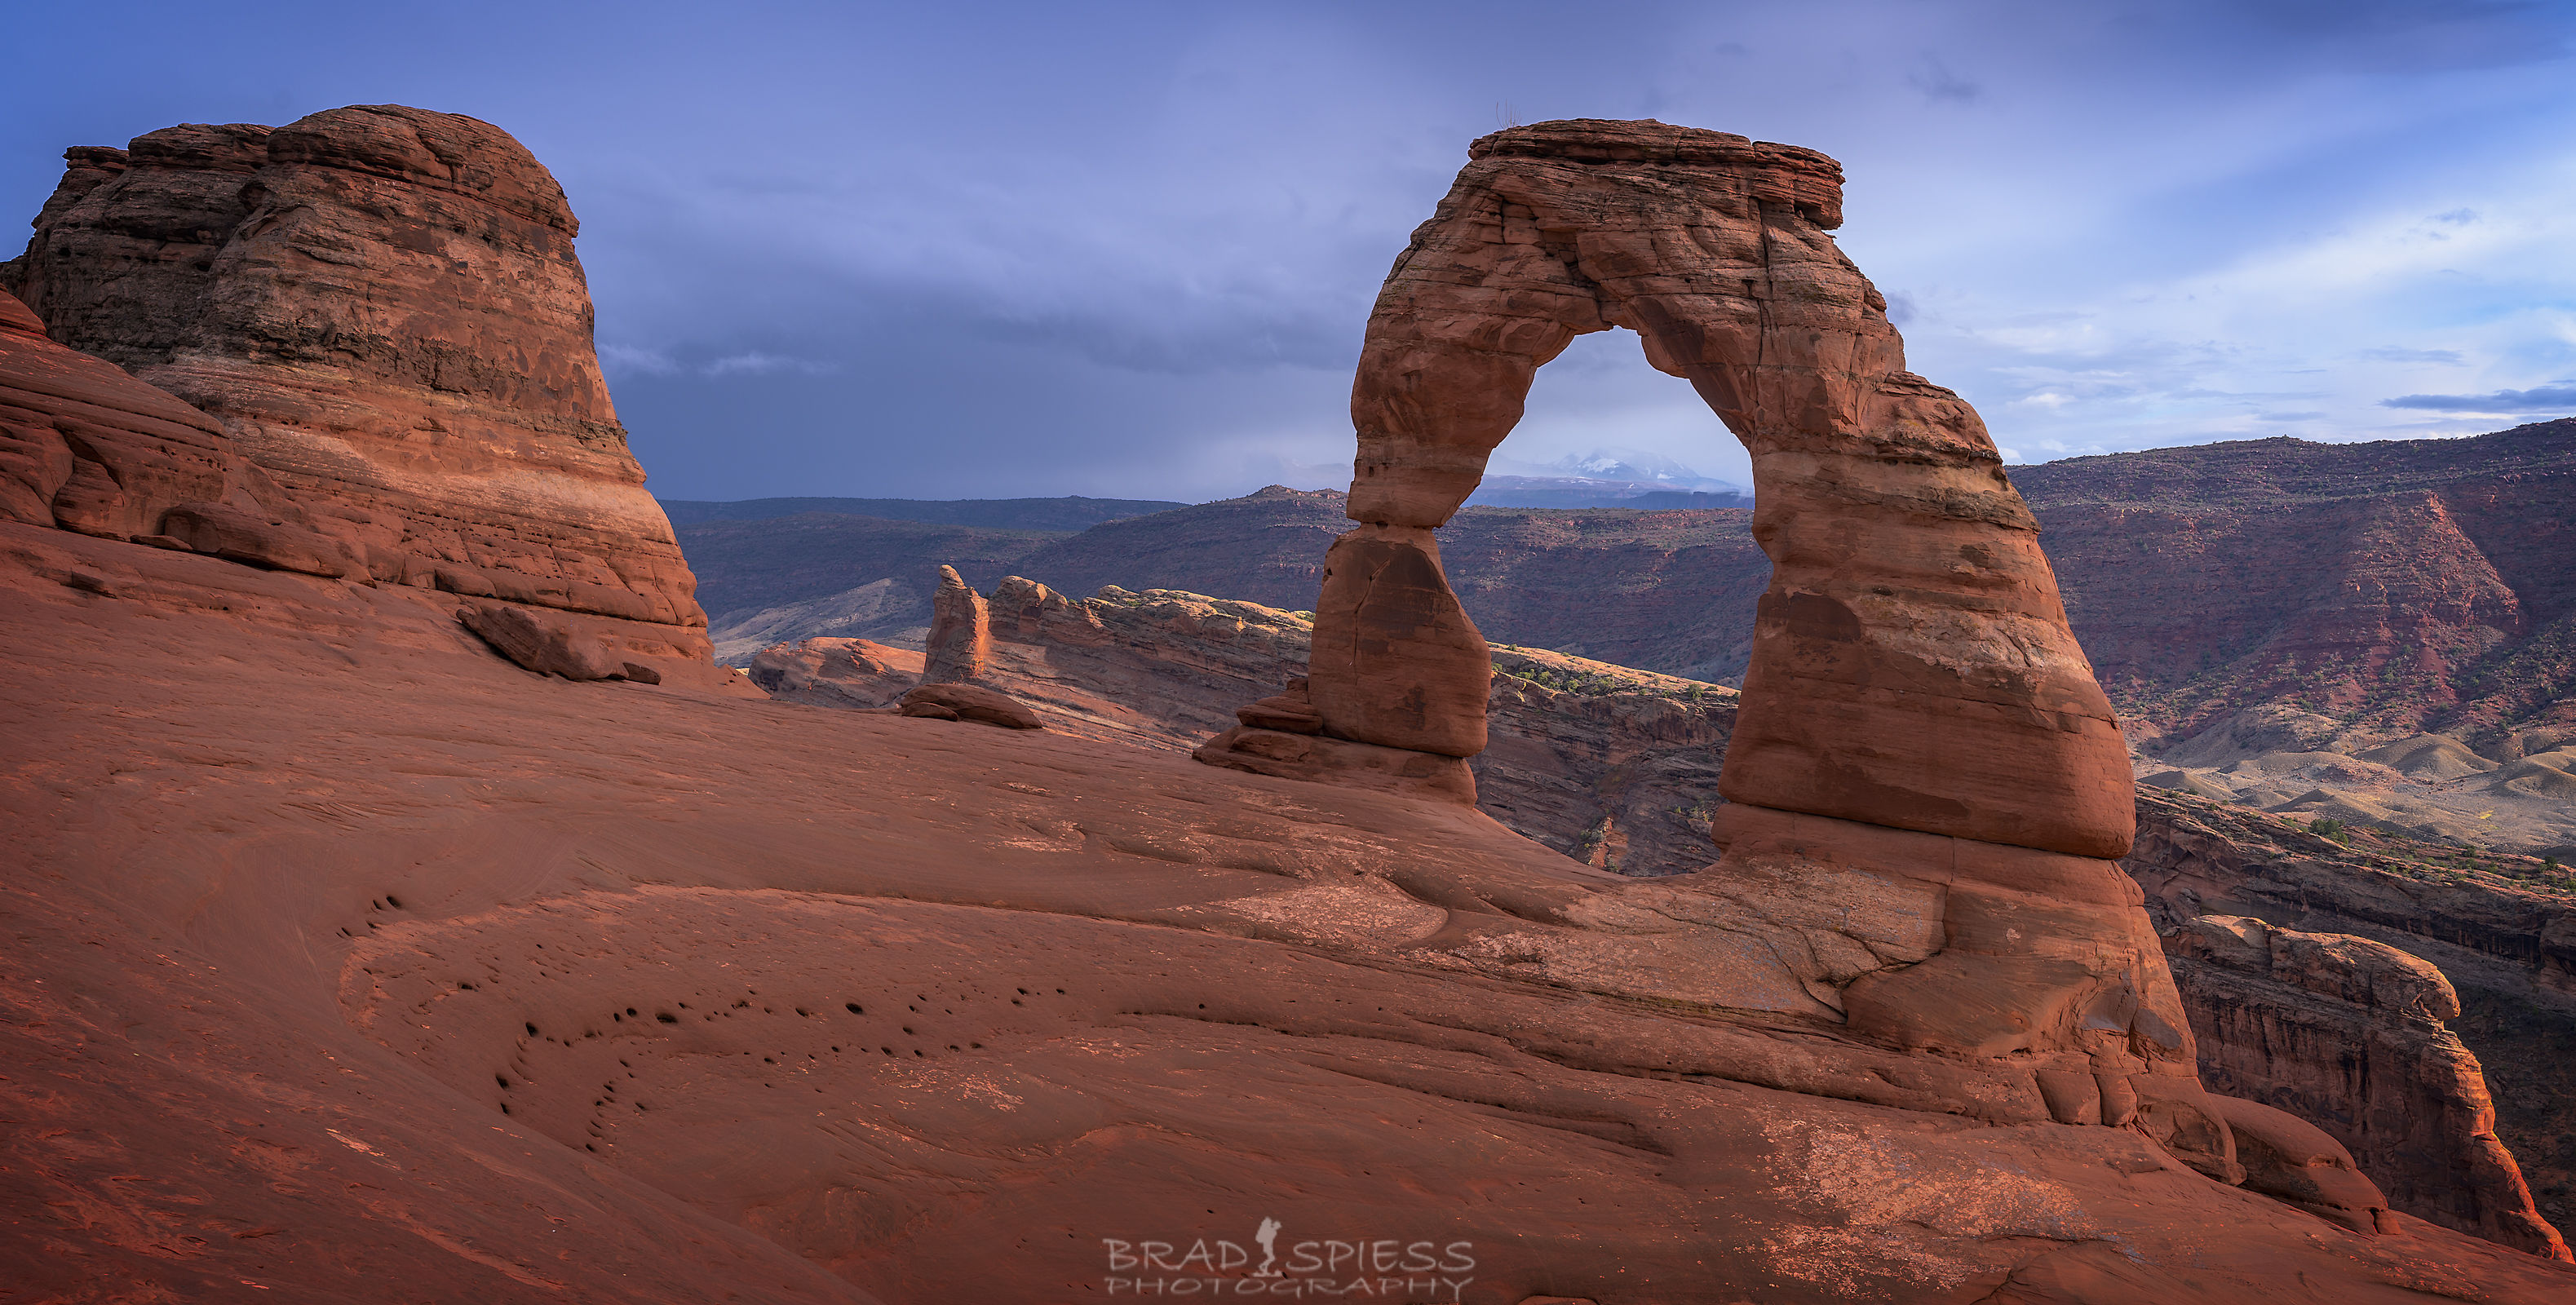 Looking through the Delicate Arch during sunset at Arches National Park